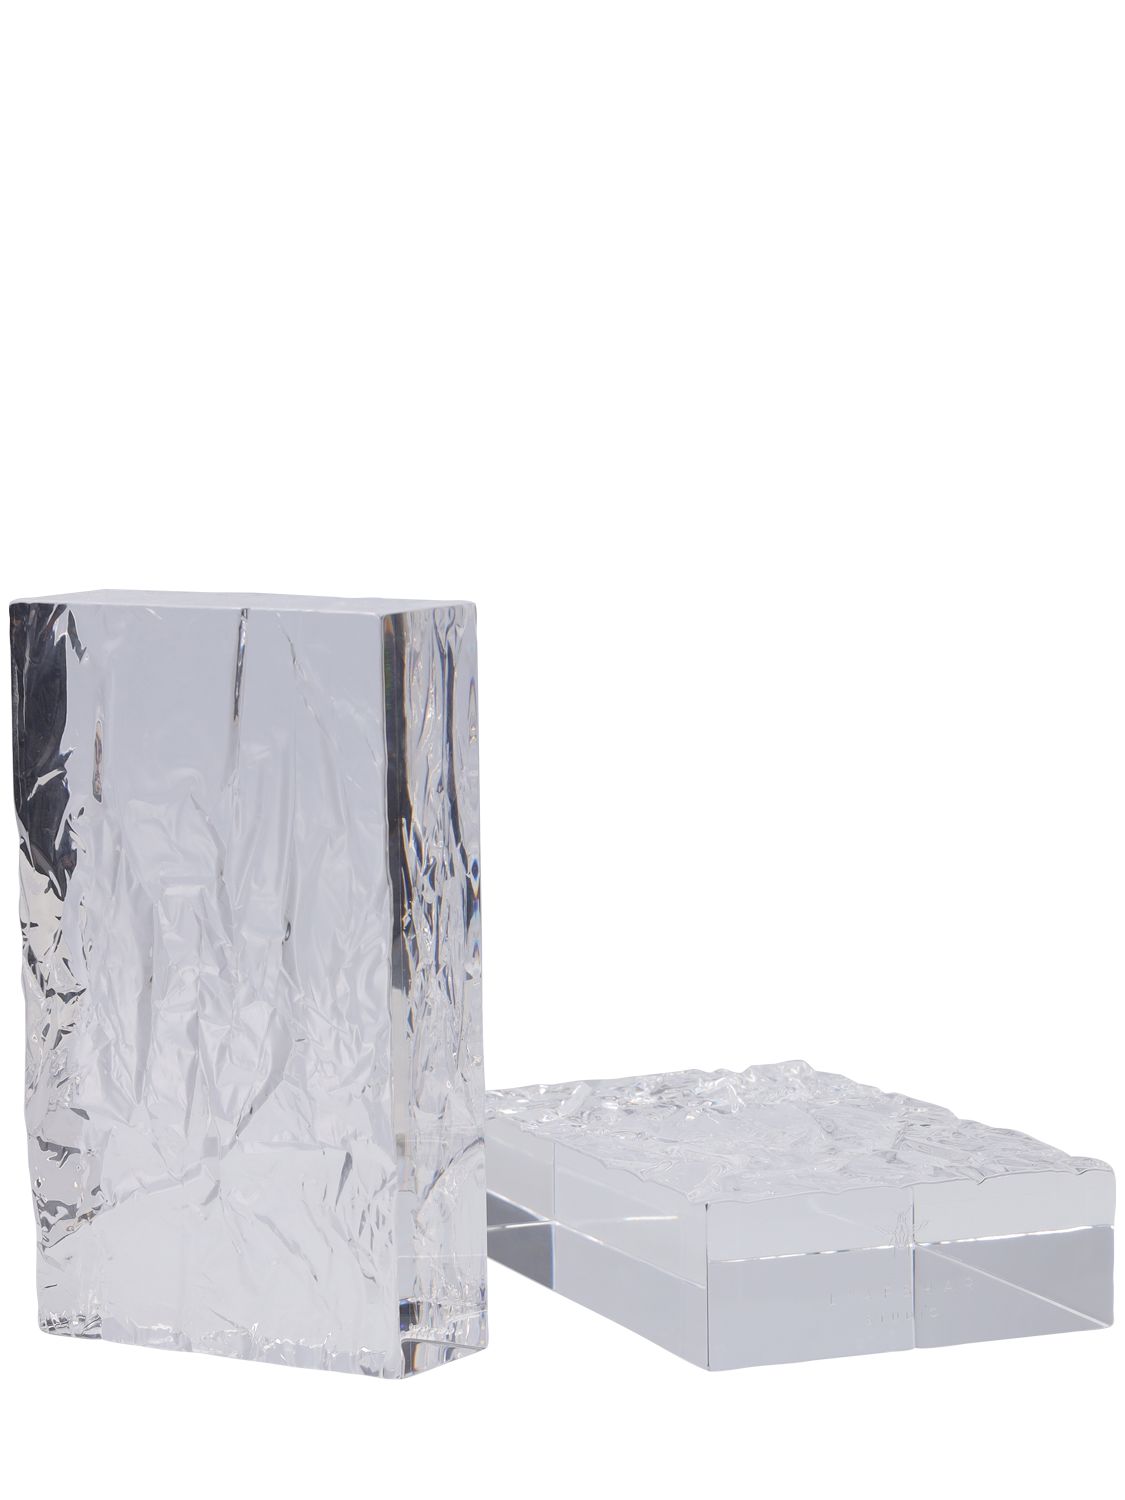  L'afshar Set Of 2 Crushed Iced Bookends 